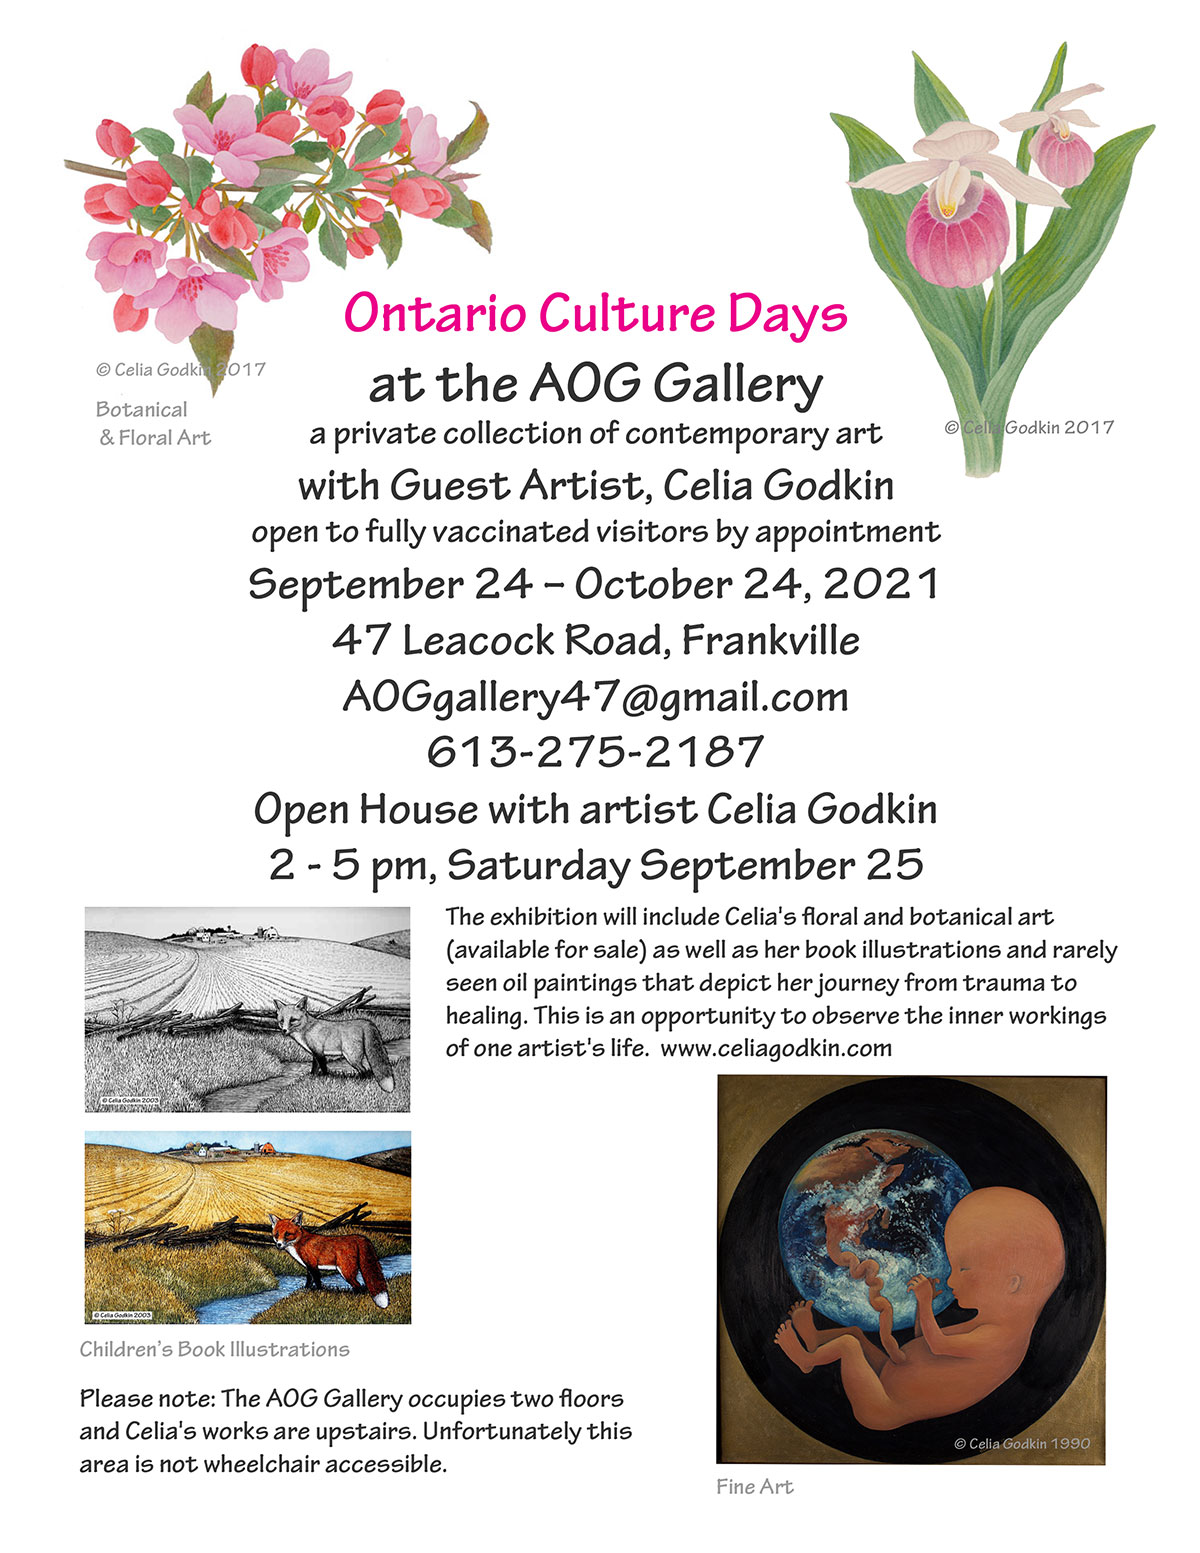 Ontario Culture Days, AOG Gallery